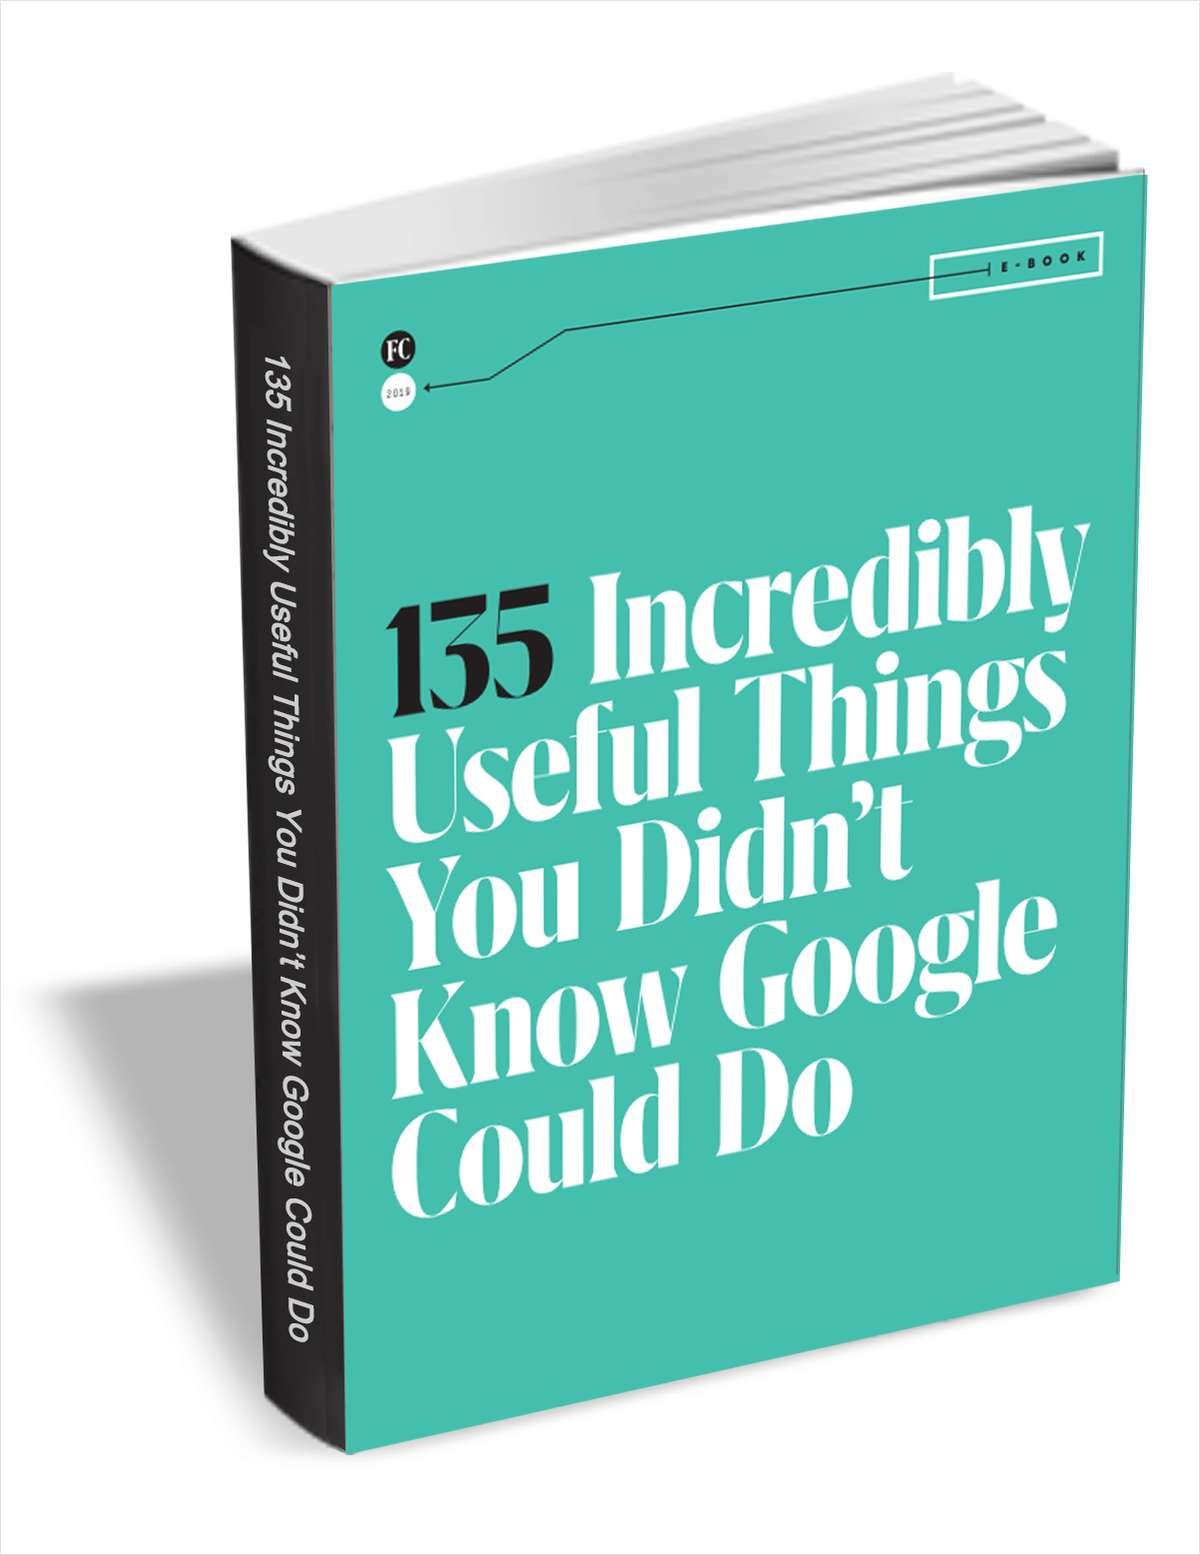 135 Incredibly Useful Things You Didn't Know Google Could Do